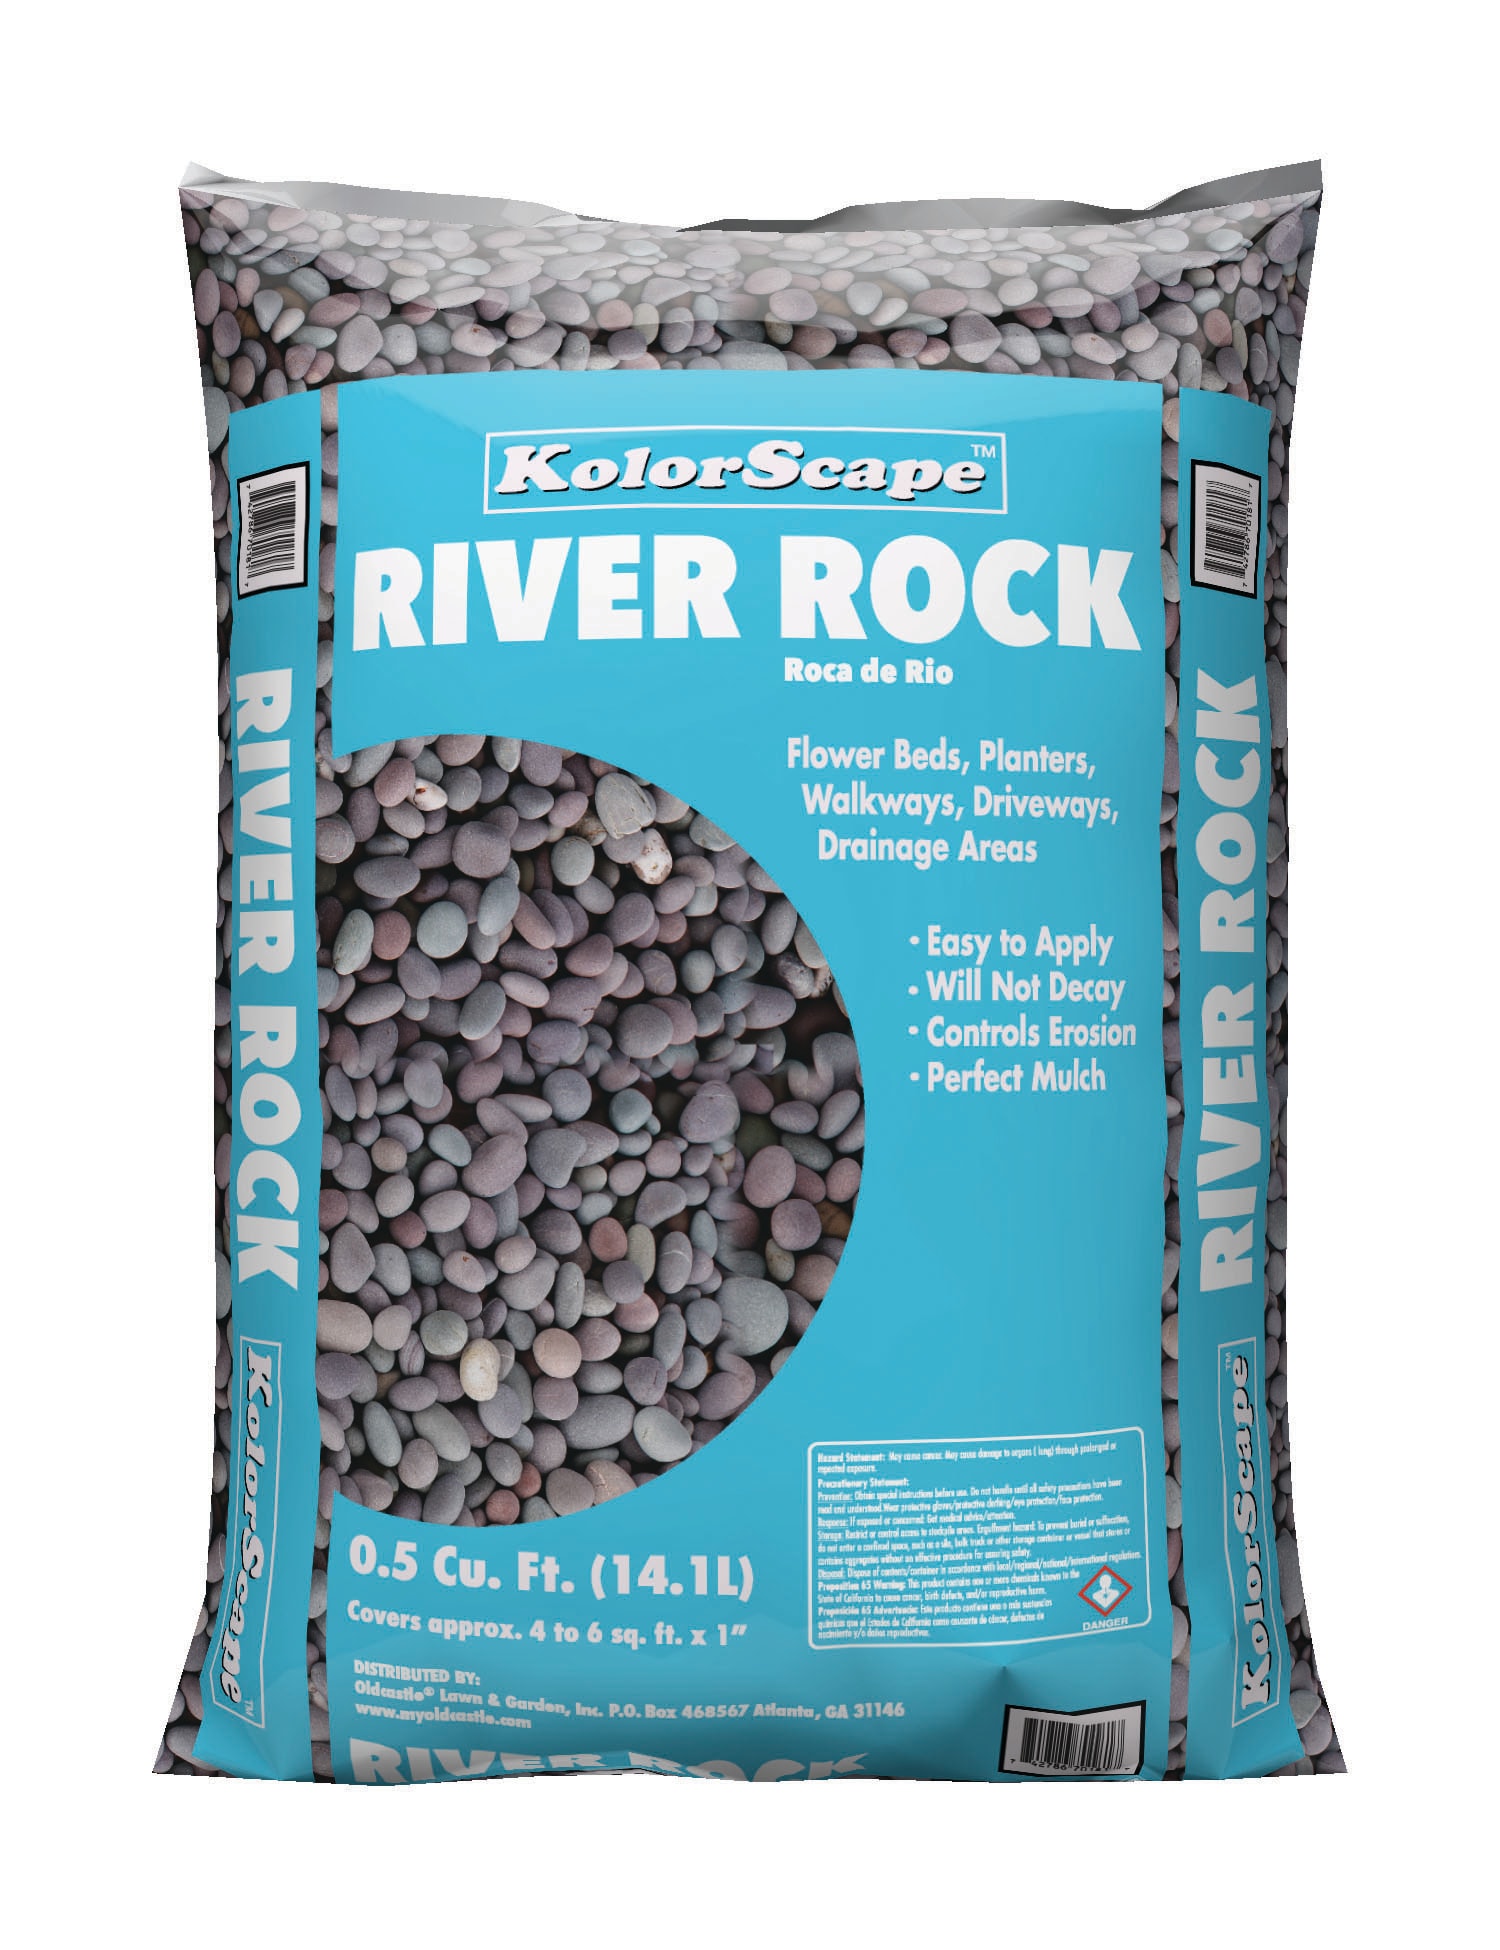 Pea gravel Landscaping Rock at Lowes.com